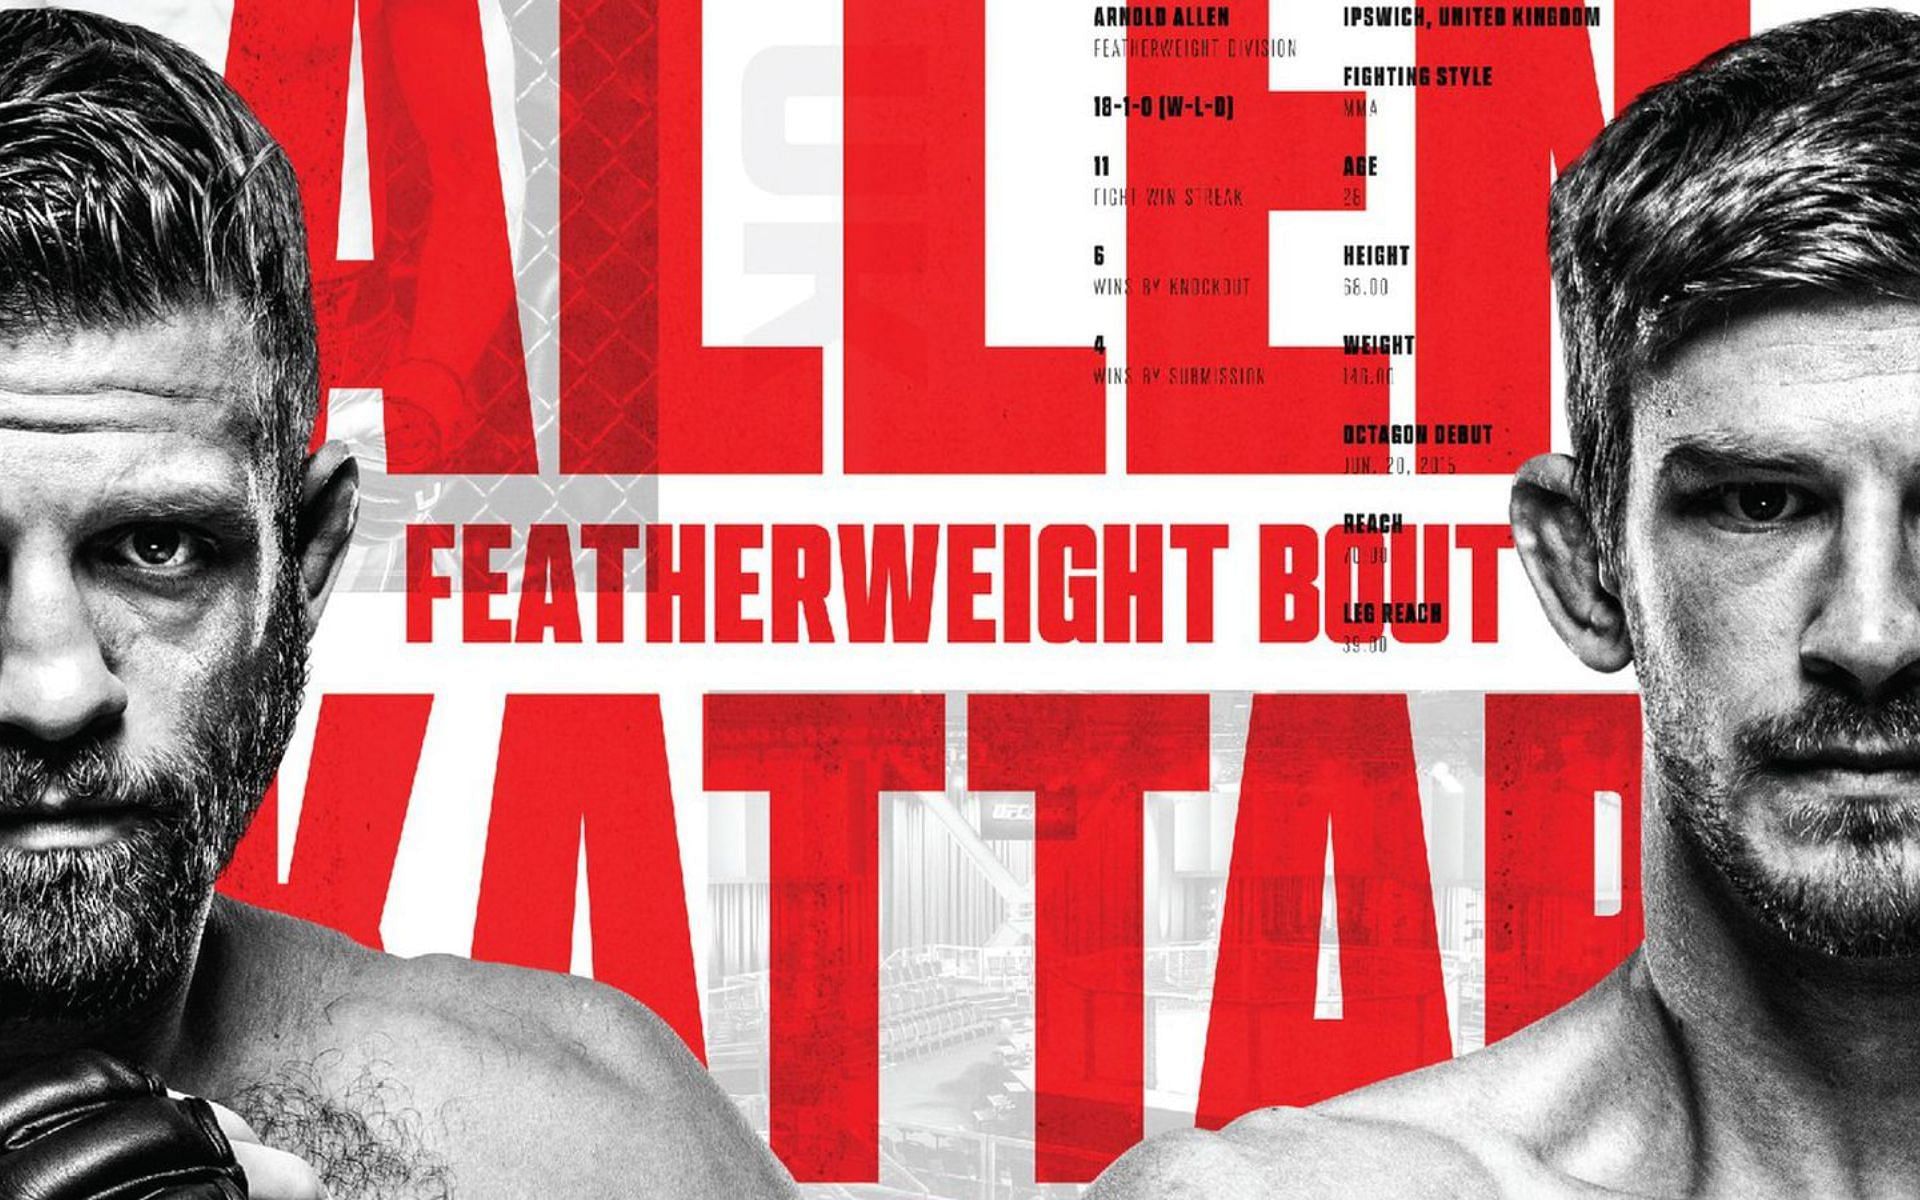 Calvin Kattar and Arnold Allen throw down in this weekend